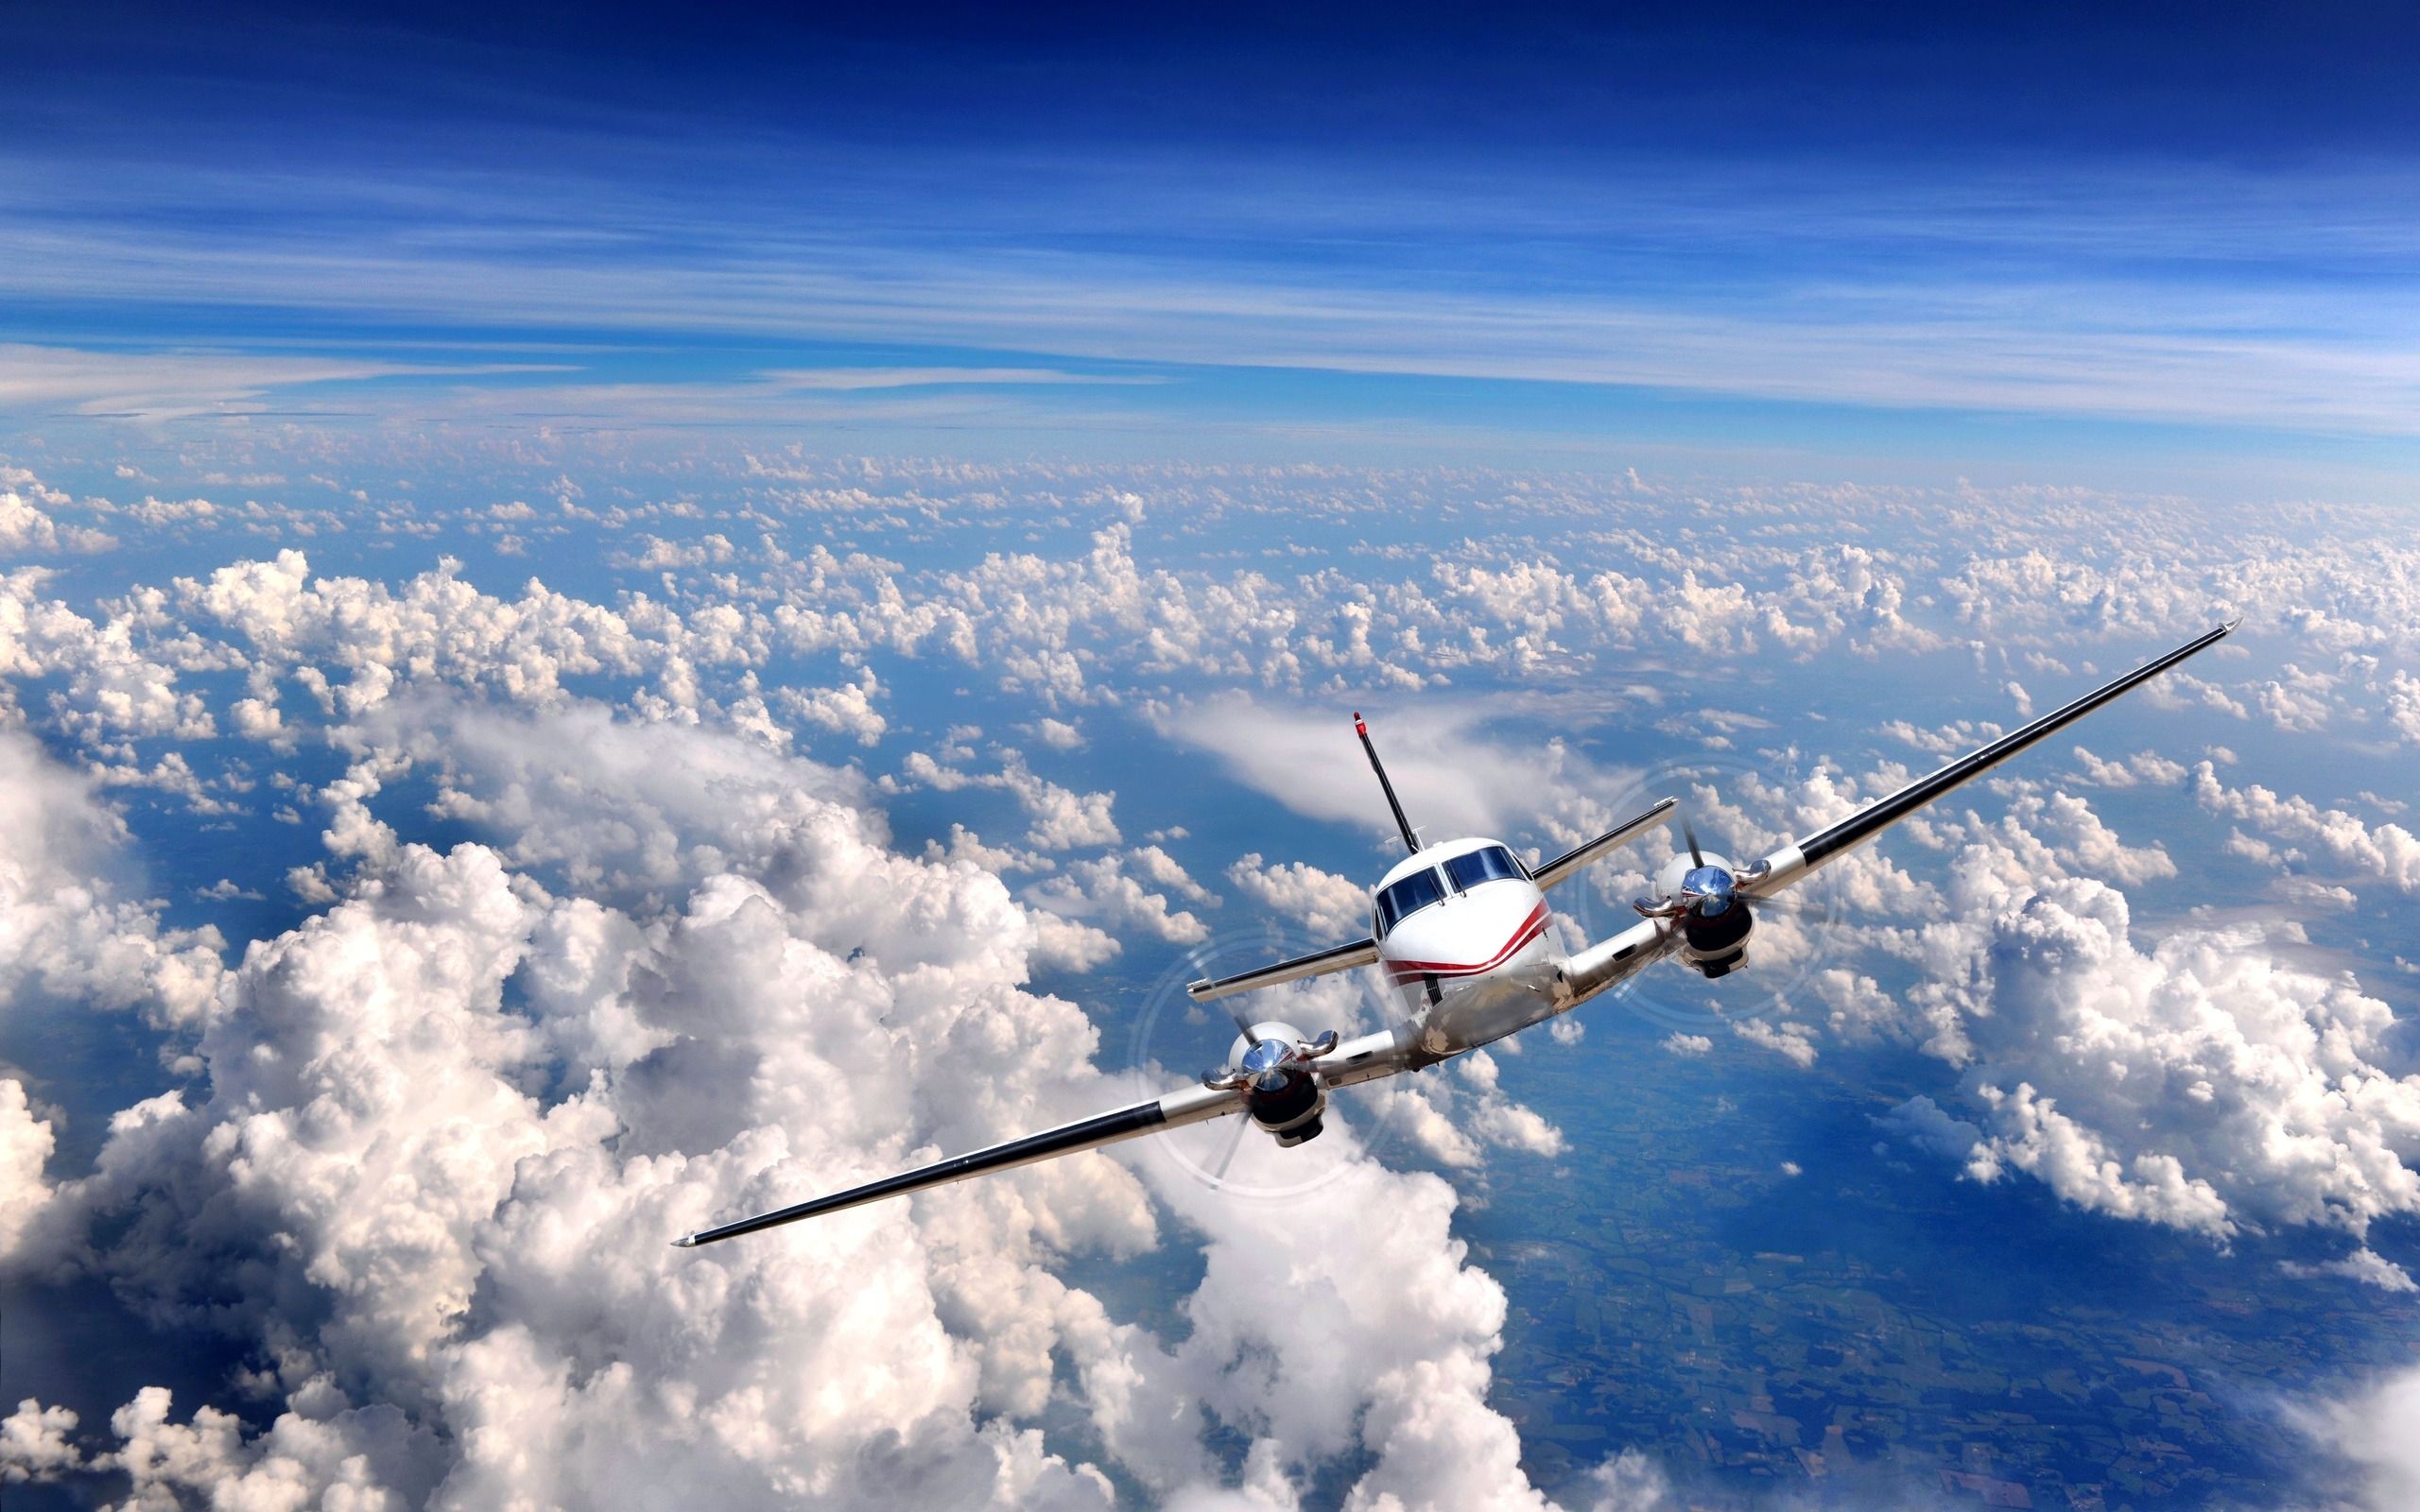 Plane among the clouds wallpapers and images - wallpapers